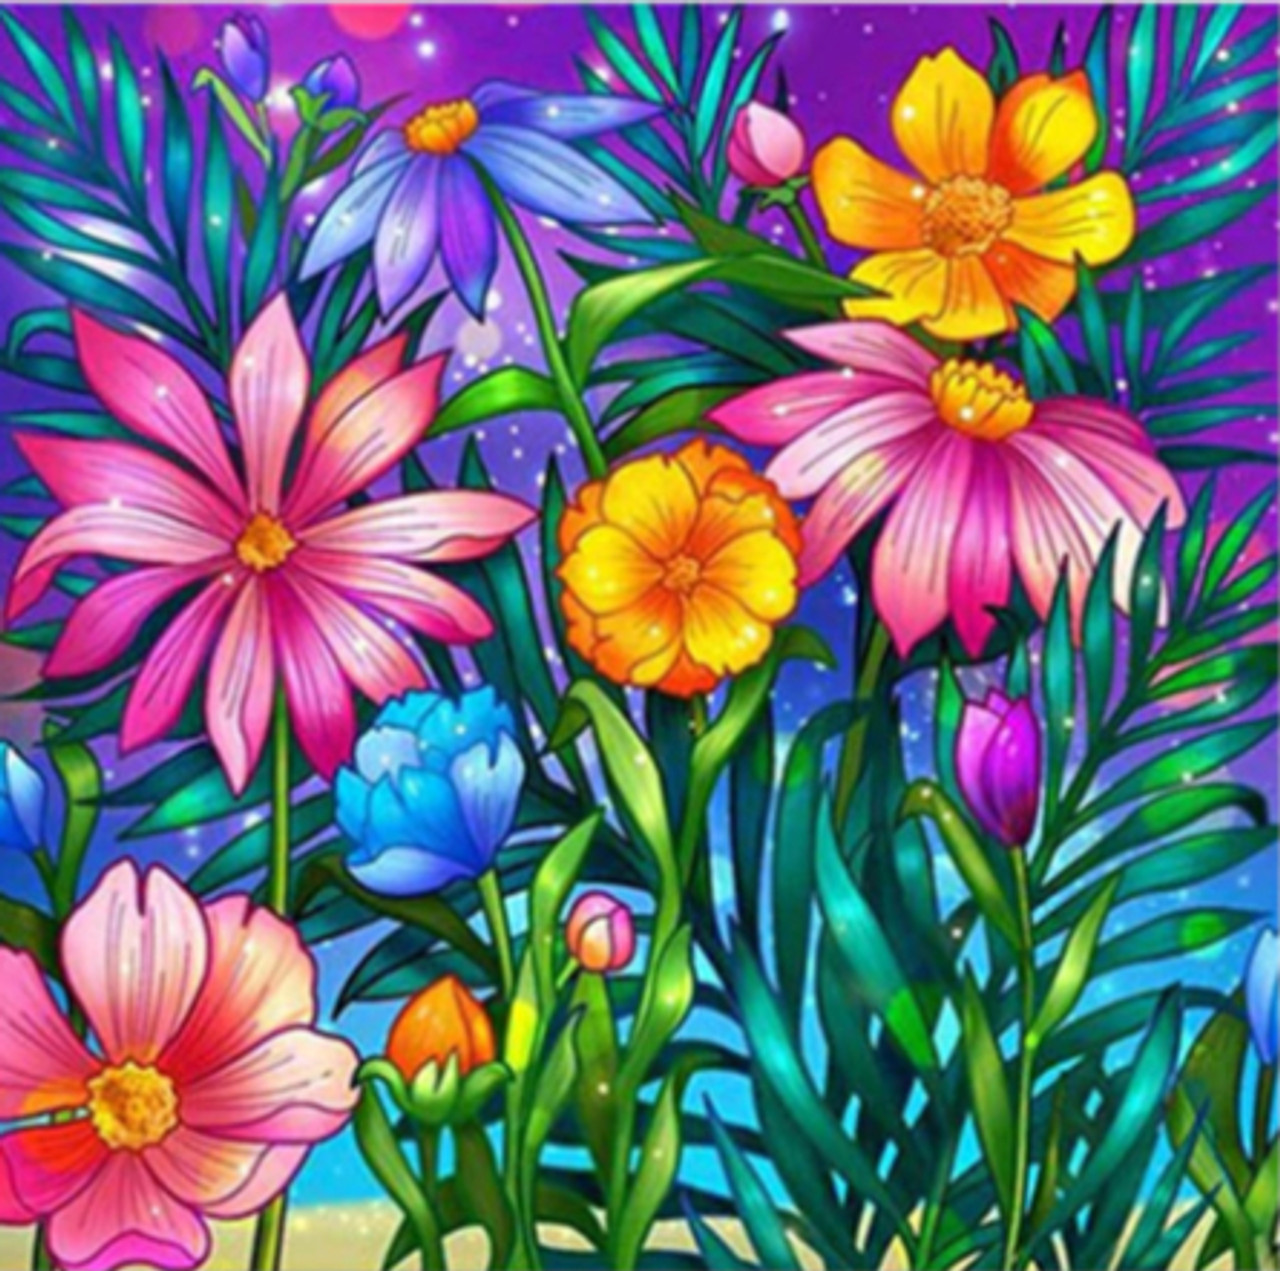 5D Diamond Painting Colorful Abstract of Flowers Kit